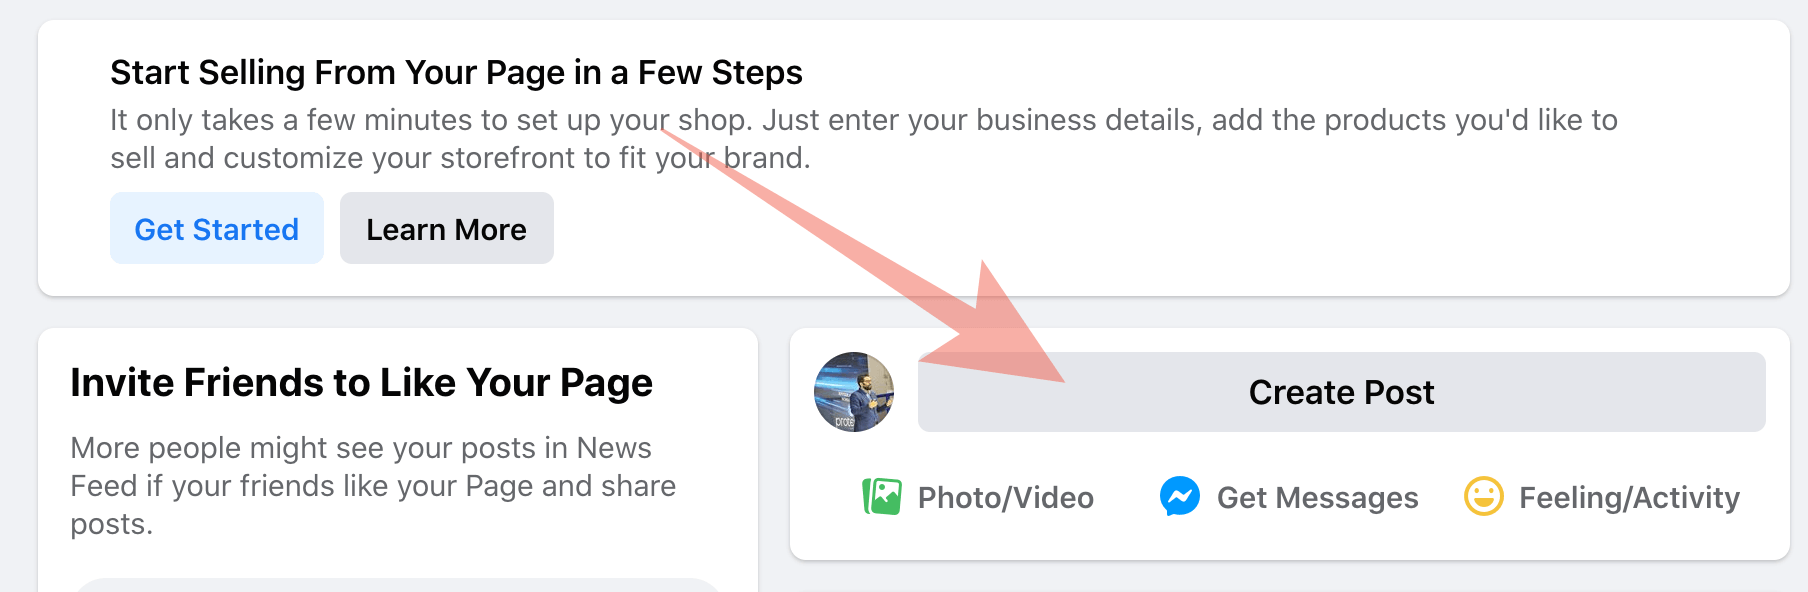 Facebook Business page create post